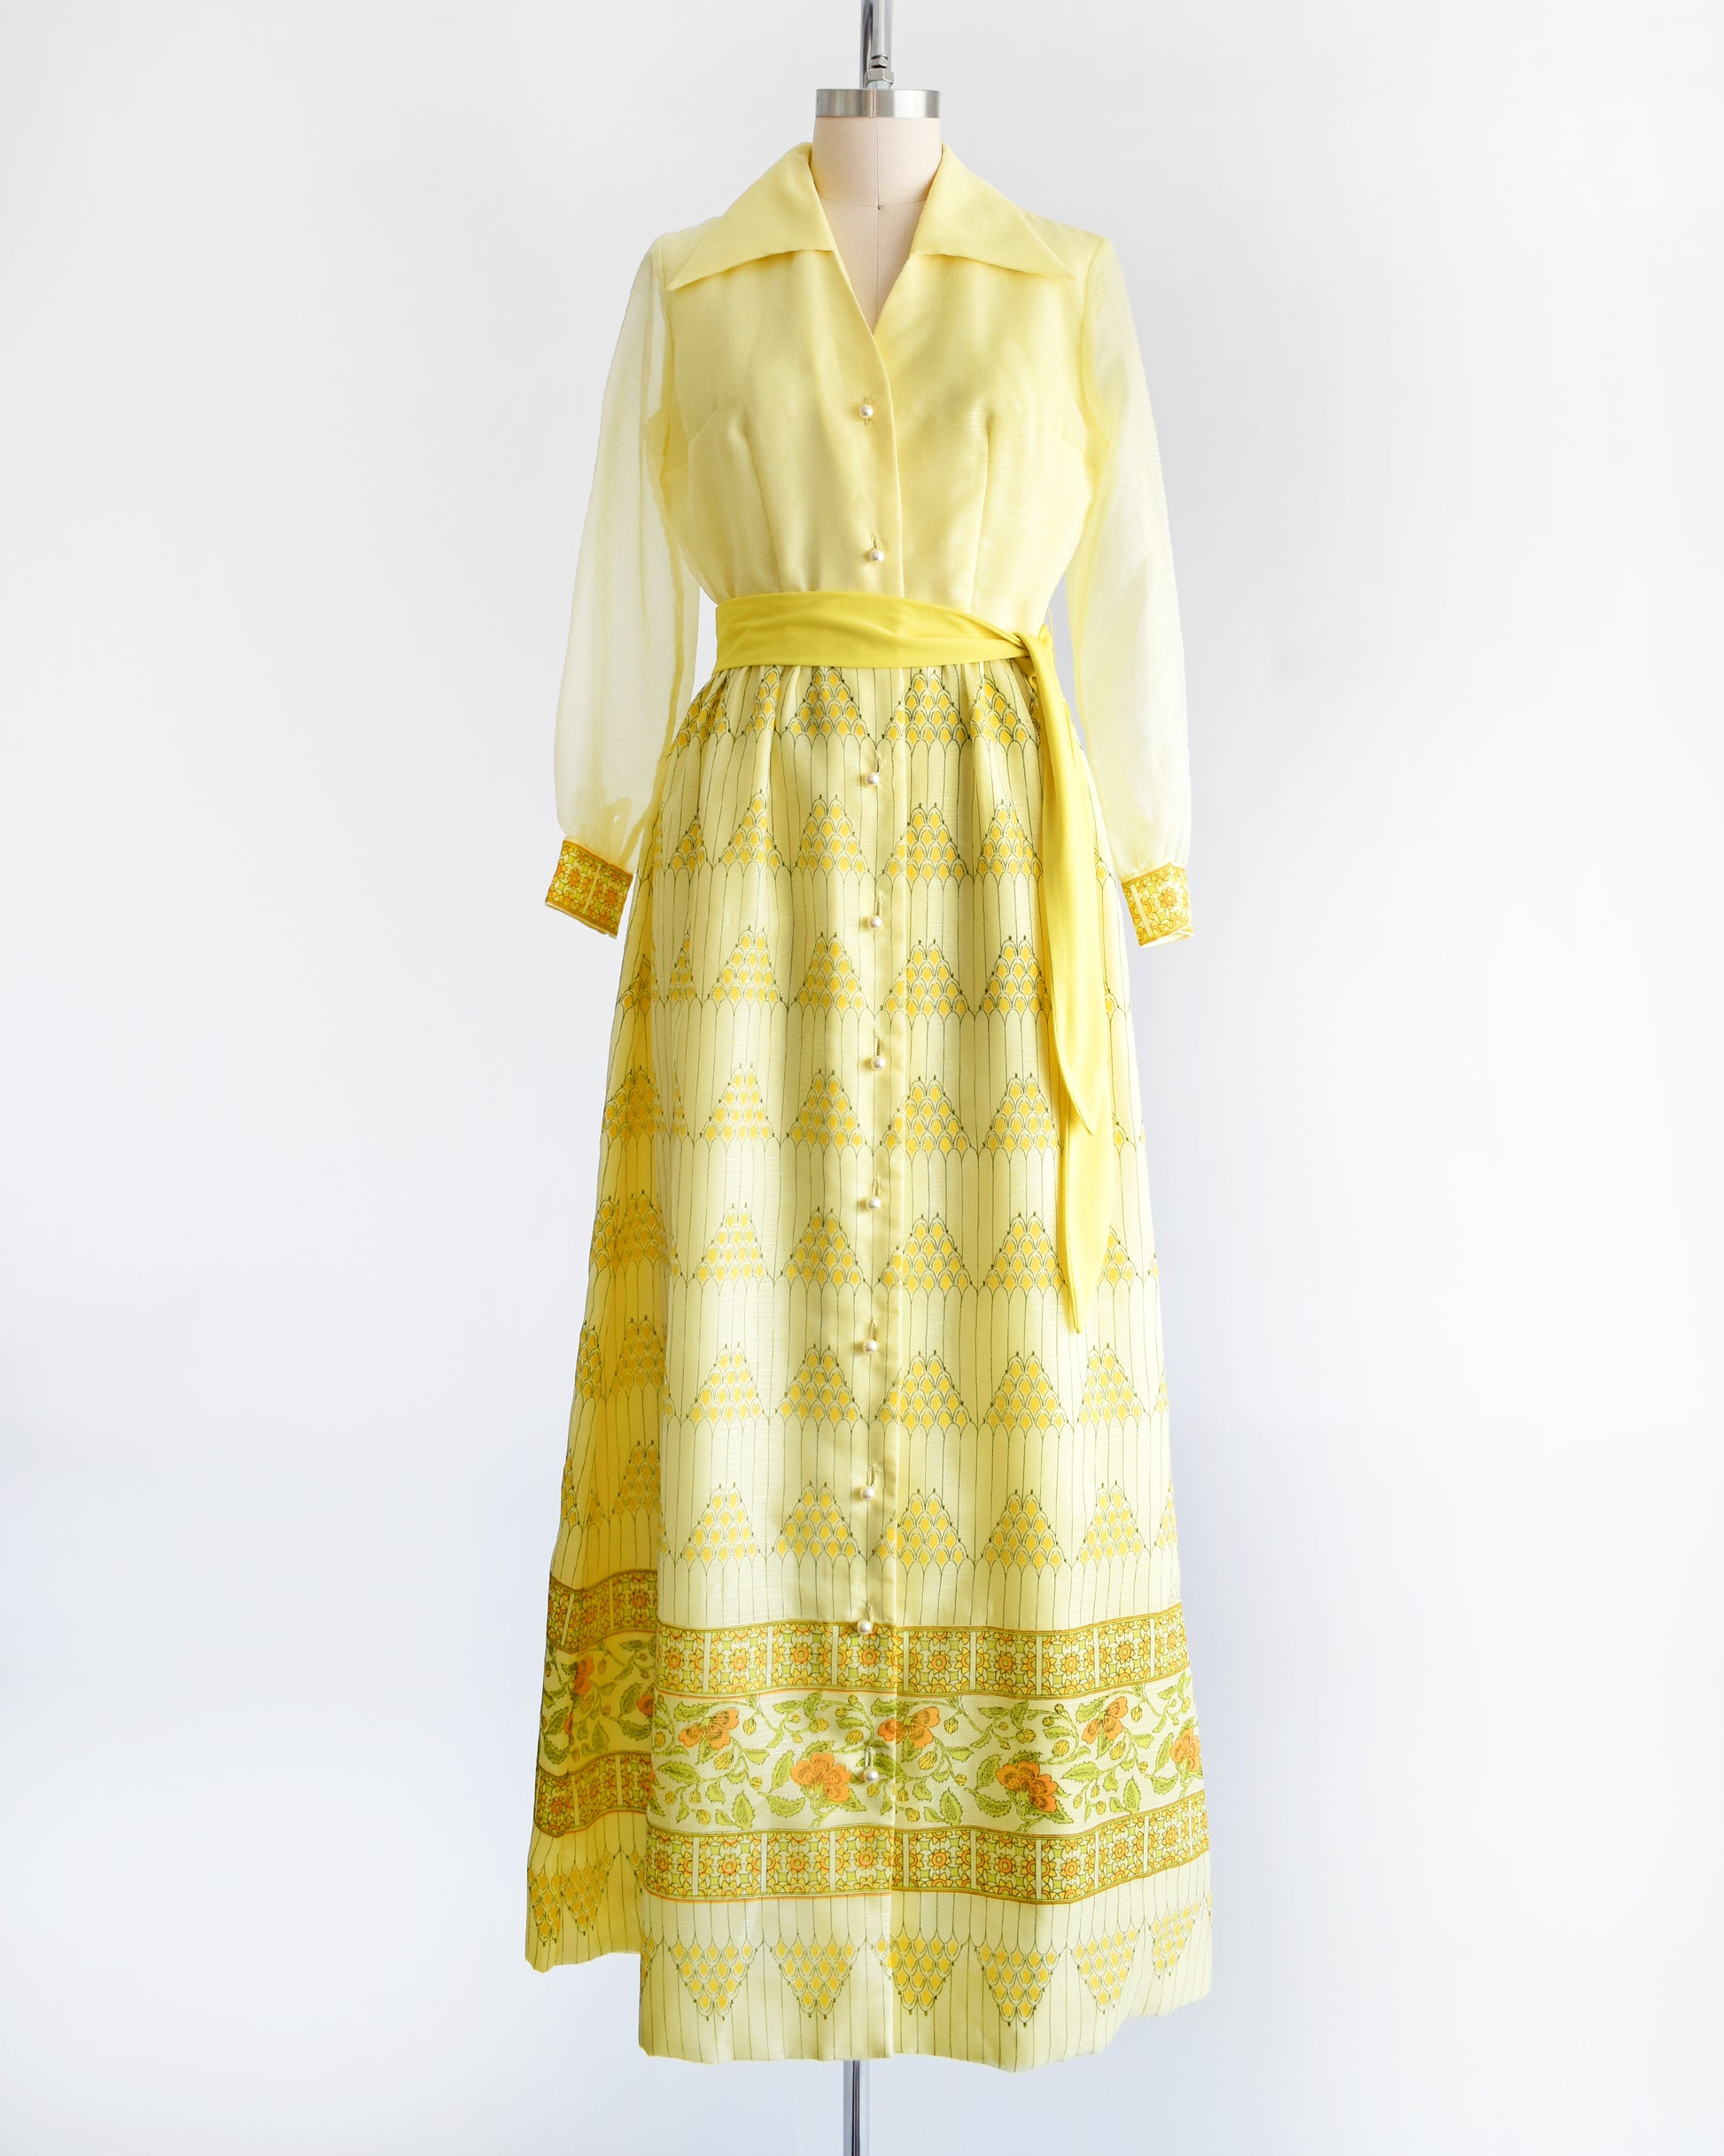 A yellow vintage maxi dress on a dress form. The dress features a collared neckline, semi sheer long sleeves, button down front, yellow sash belt, and a maxi skirt that has a pyramid and floral print.